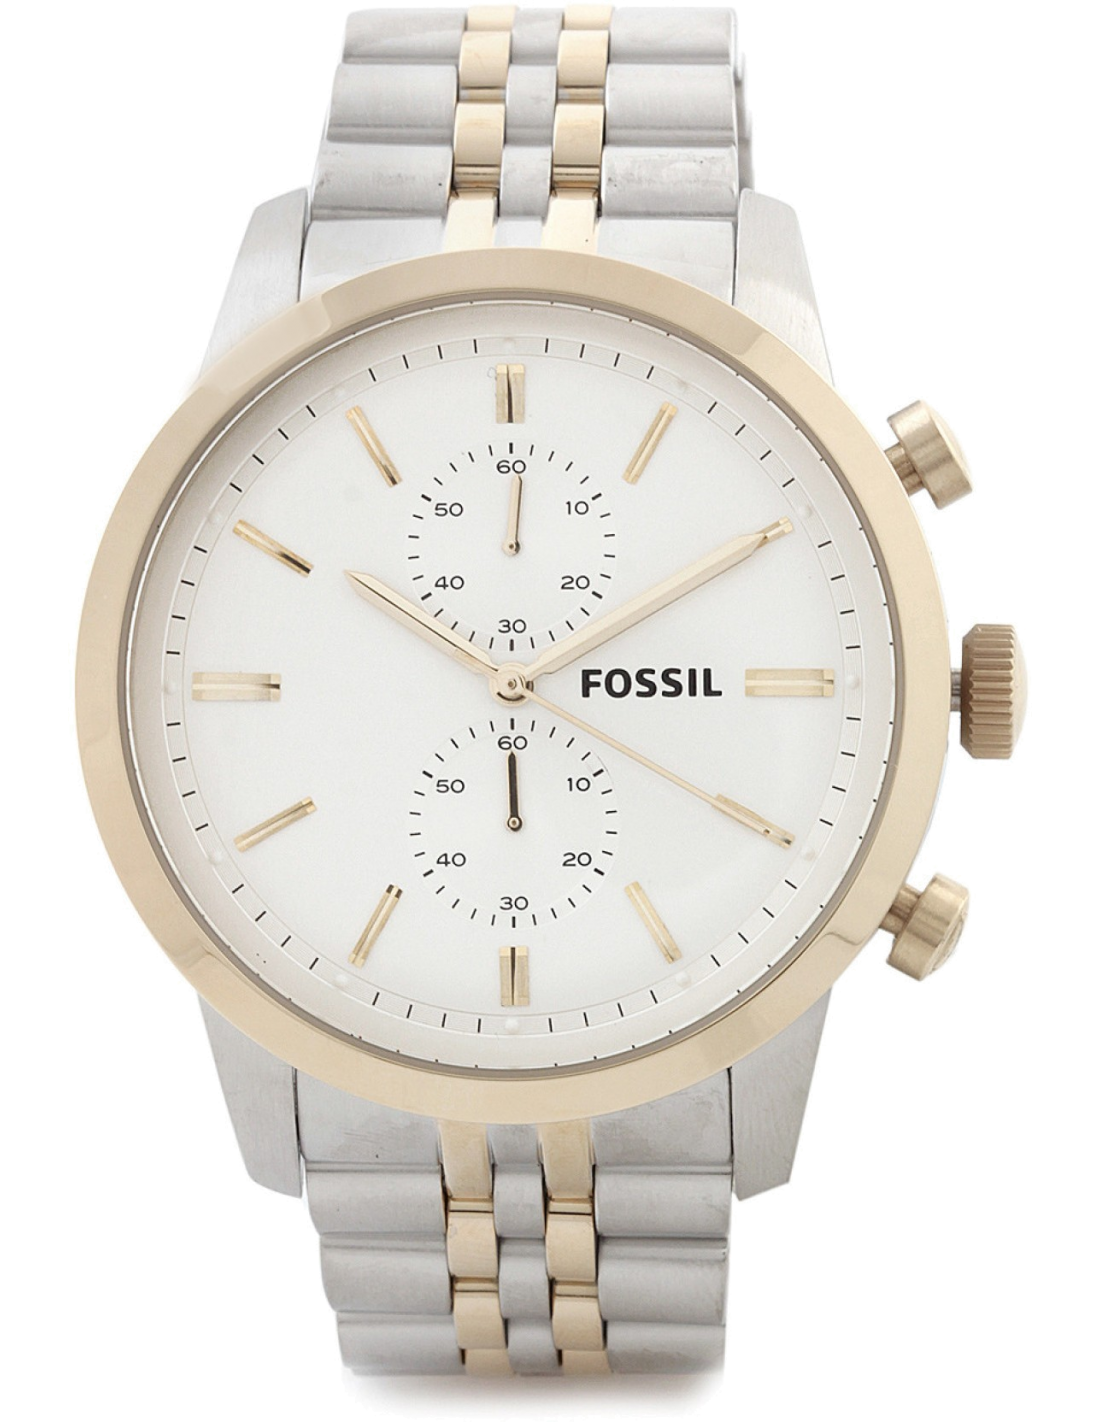 Fossil FS4785 men's watch at 152,10 € ➤ Authorized Vendor